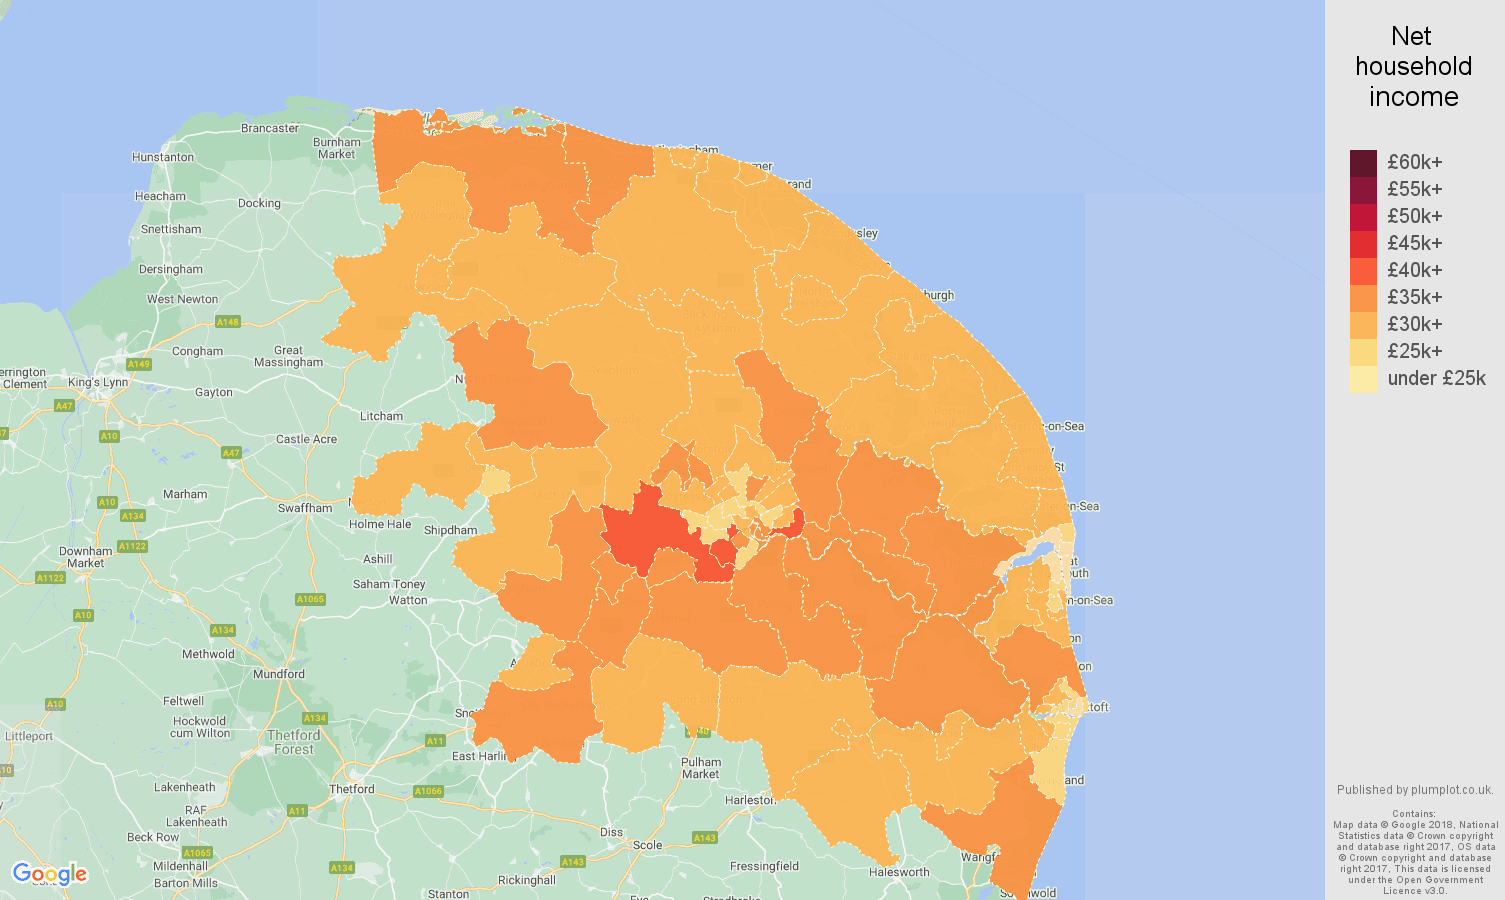 Norwich net household income map